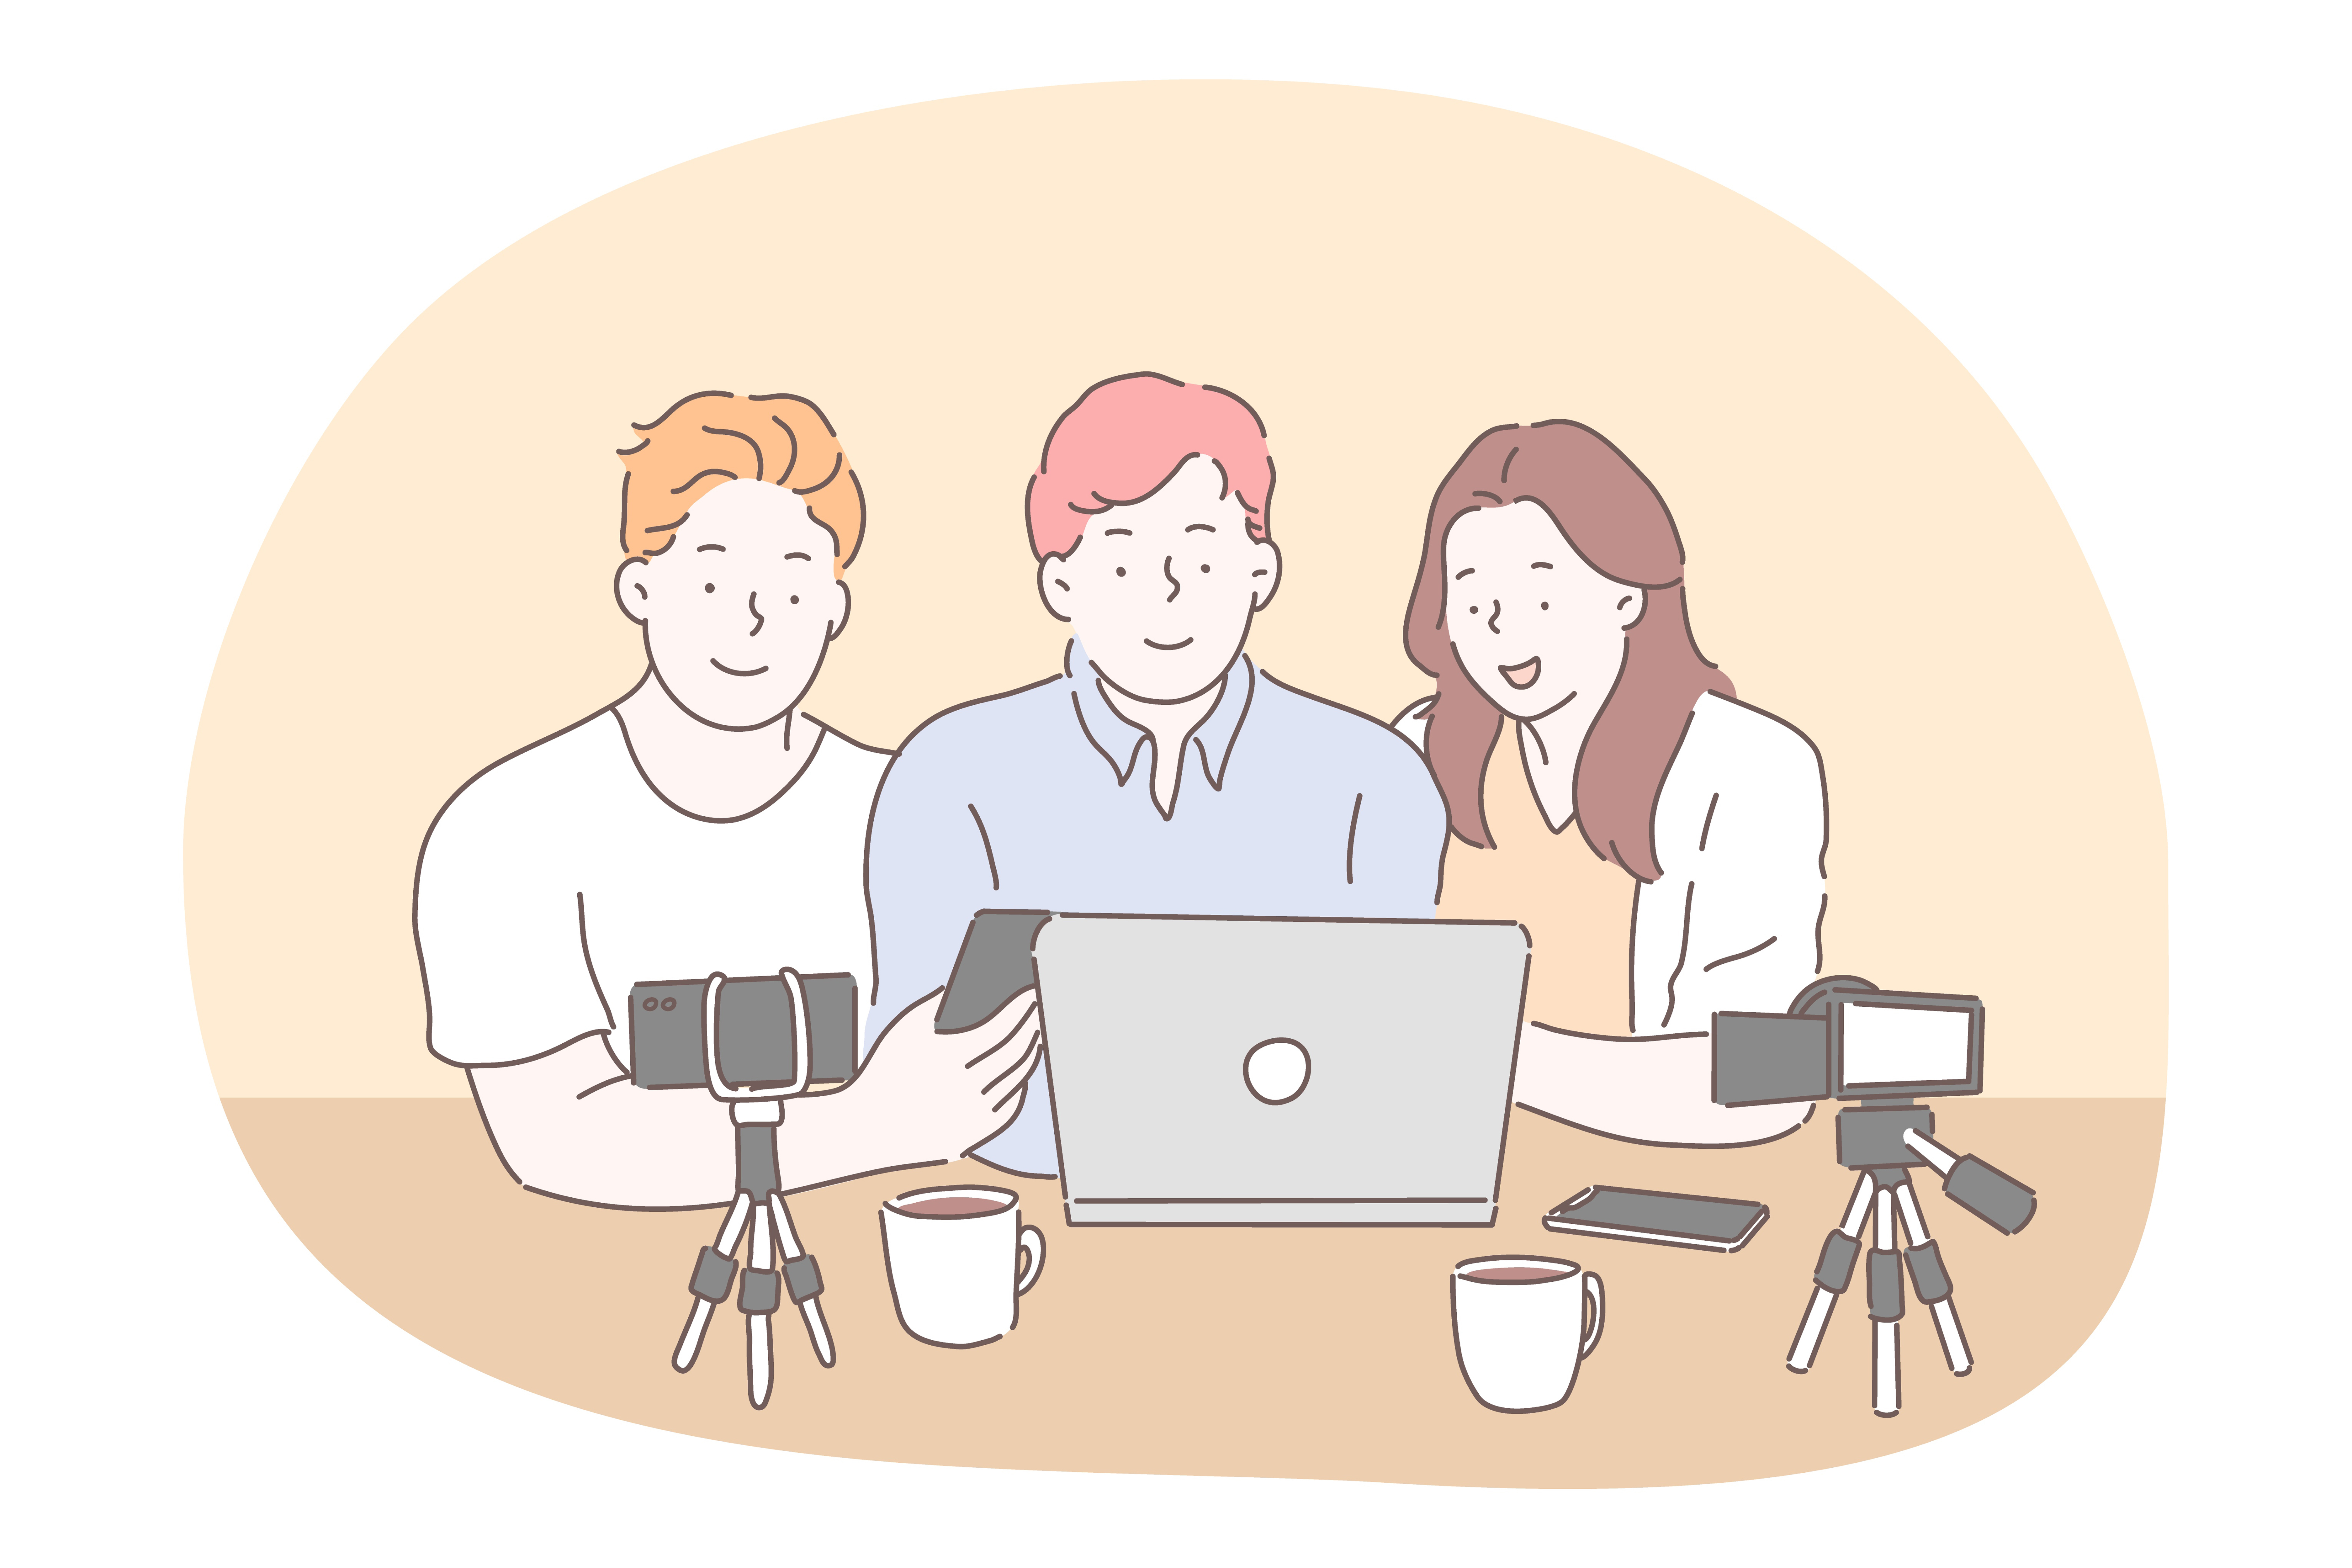 Blogging, vlogging, sharing video content online concept. Teen boys and girl cartoon characters sitting with smartphone cameras on tripods and laptop and preparing for recording video for sharing . Blogging, vlogging, sharing video content online concept